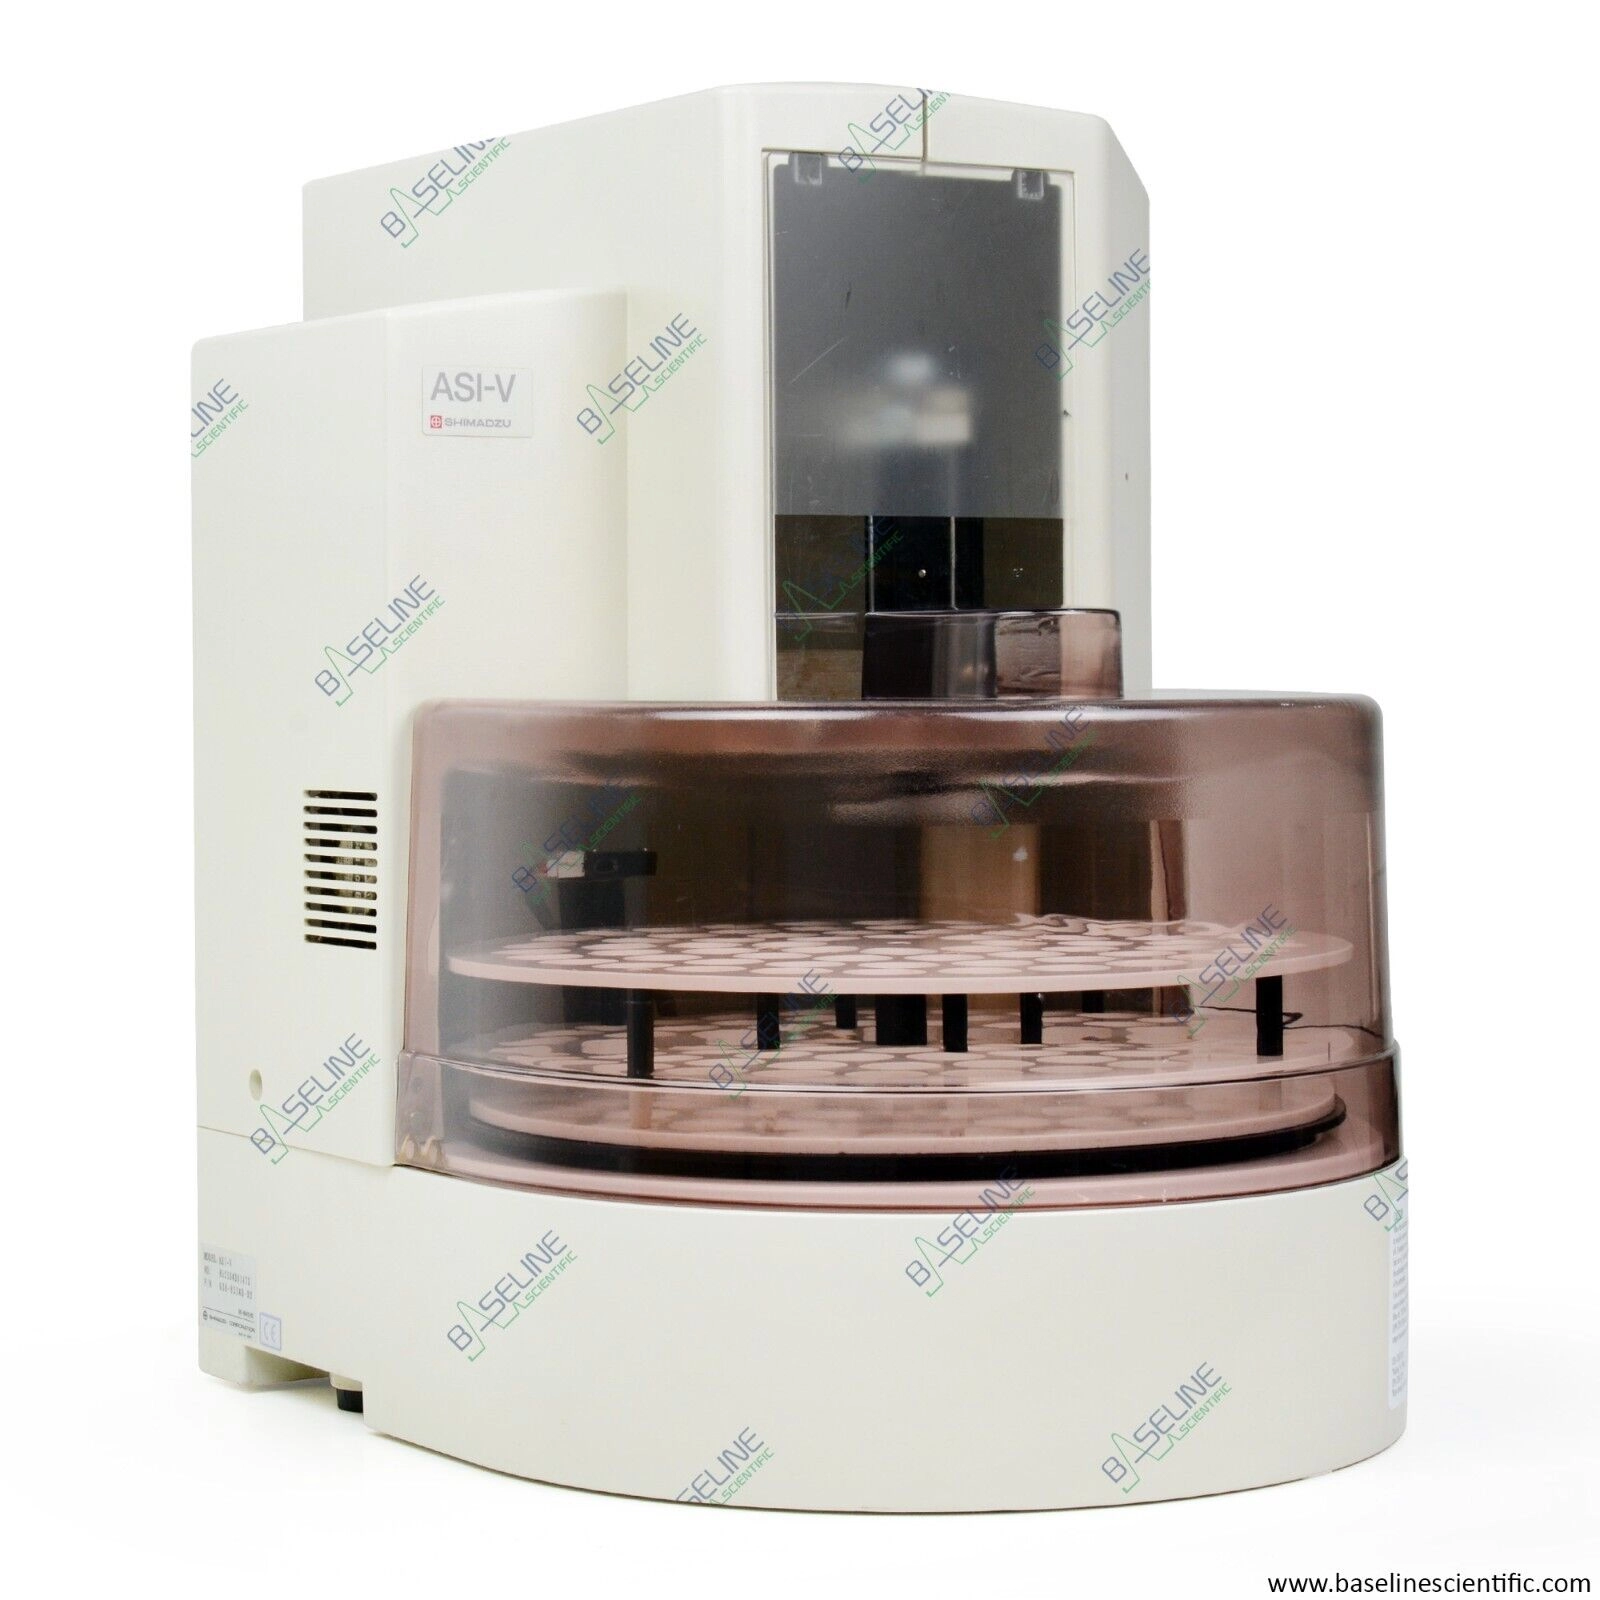 Shimadzu TOC ASI-V Autosampler with ONE YEAR WARRA